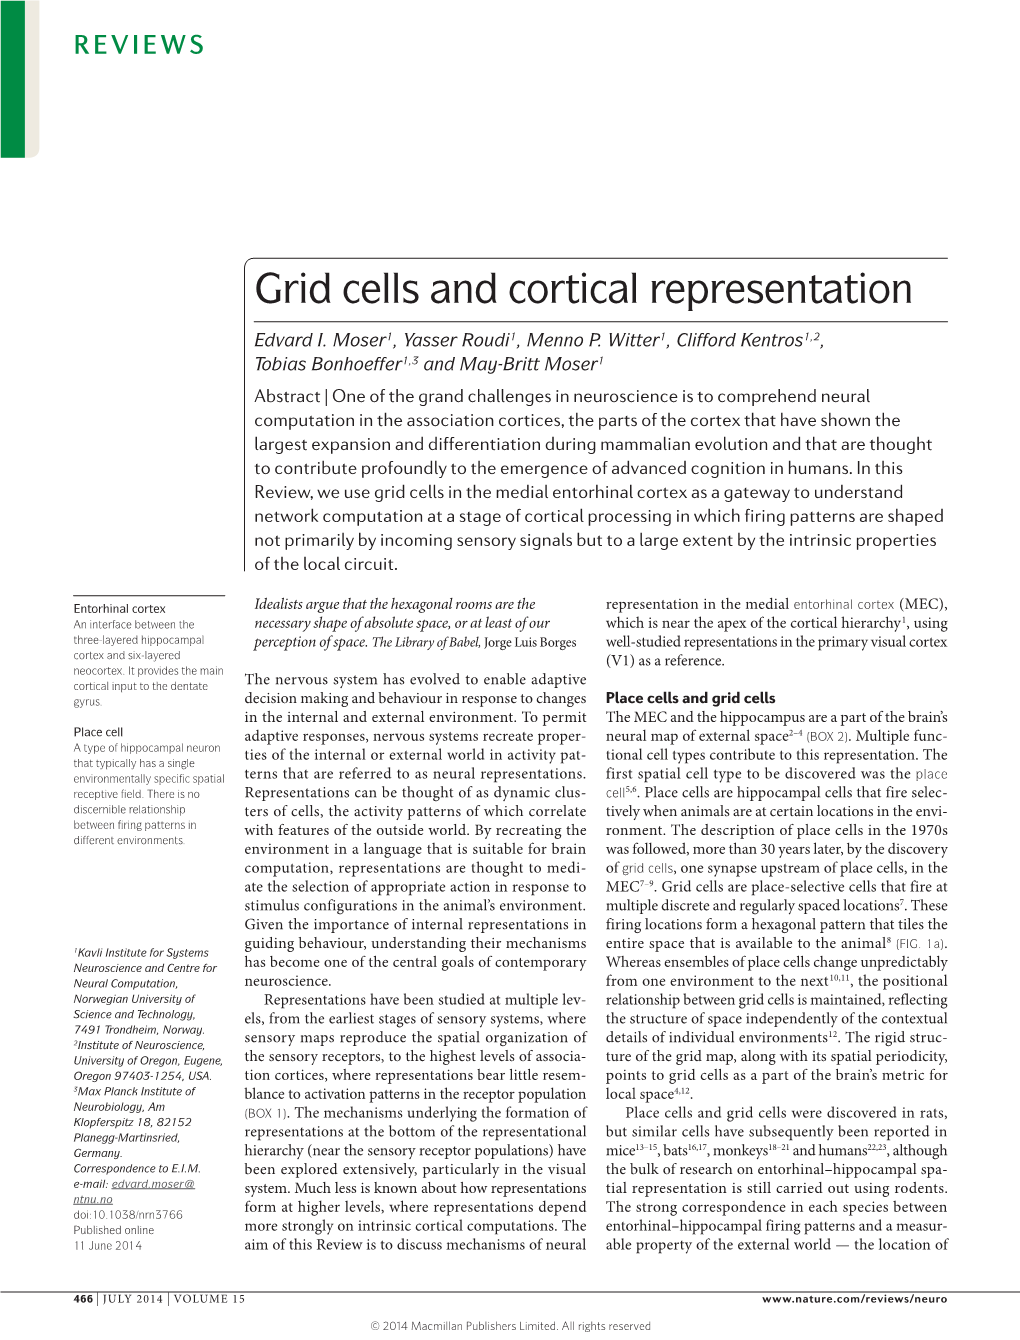 Grid Cells and Cortical Representation